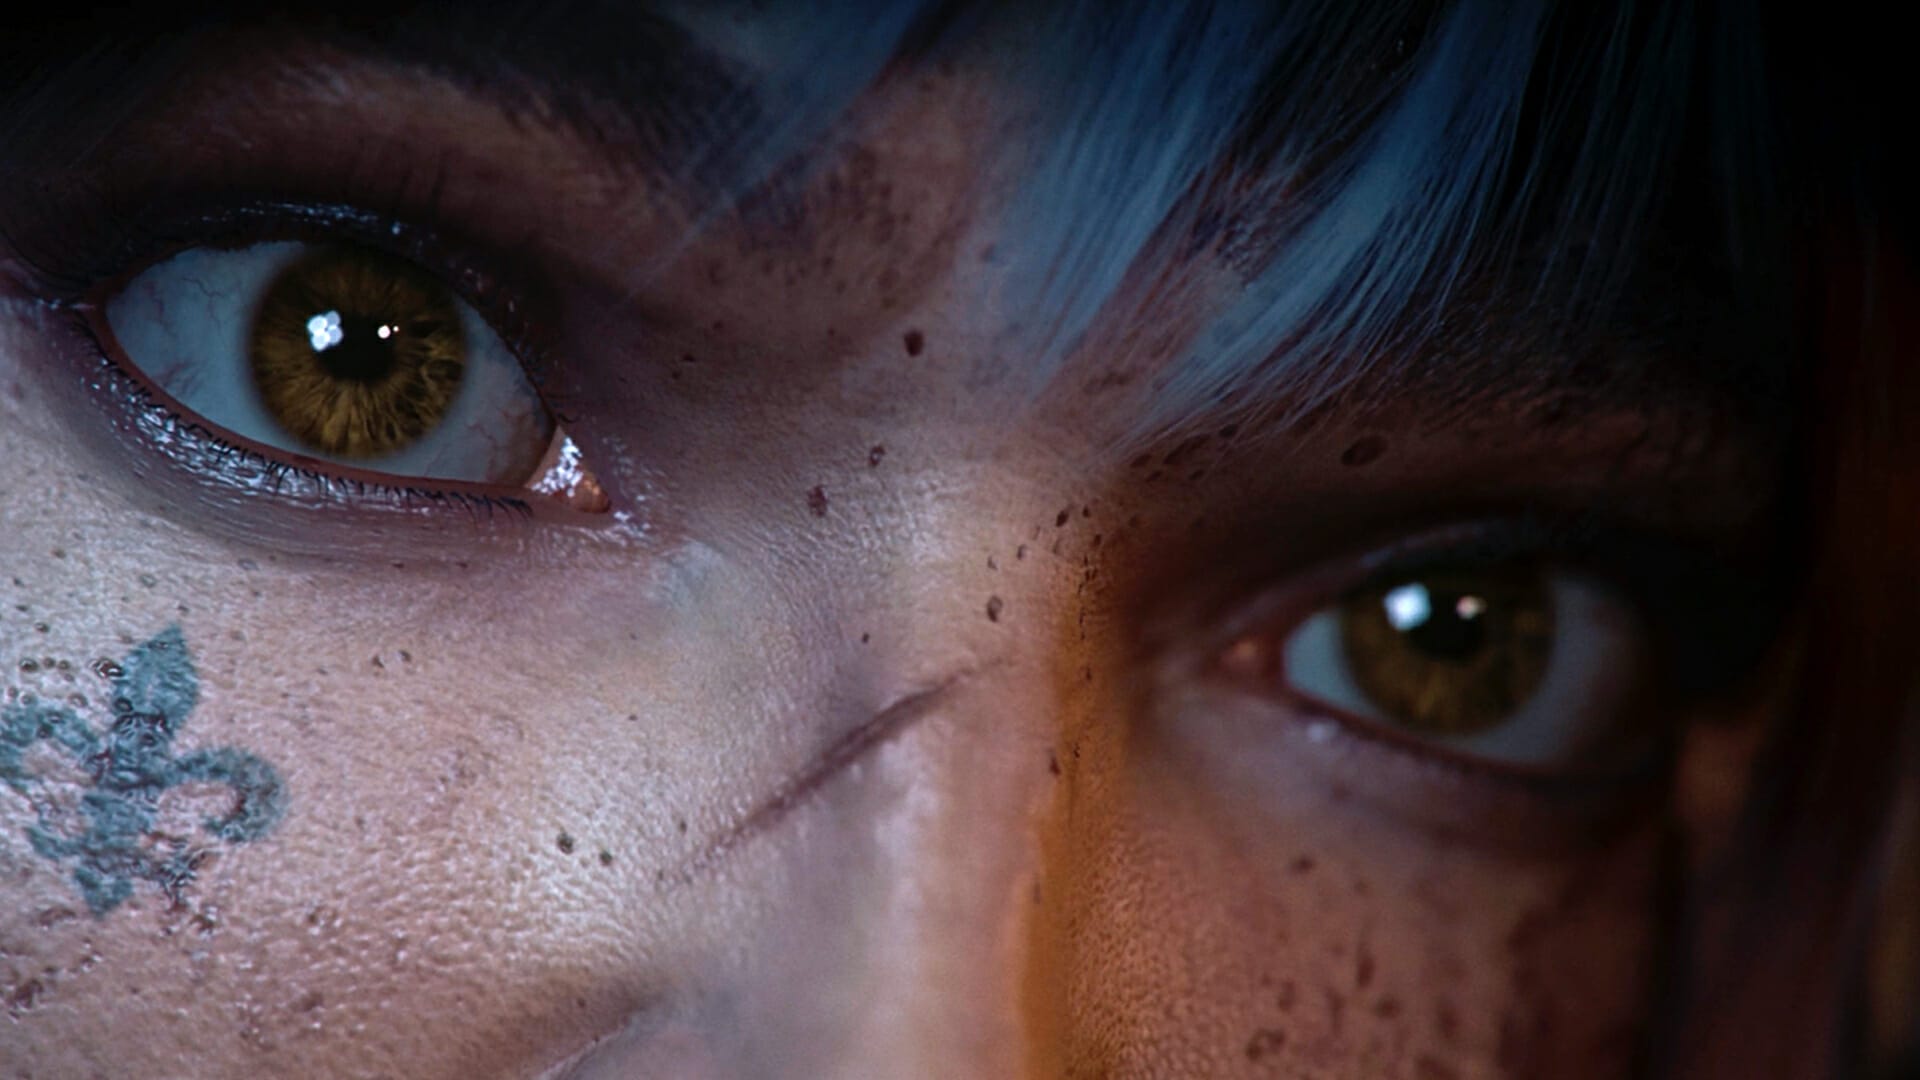 Close-up of a detailed eye with the reflection of a battle scene, accompanied by the text 'Pushing the Boundaries of Unreal, Warhammer Pariah Nexus'.